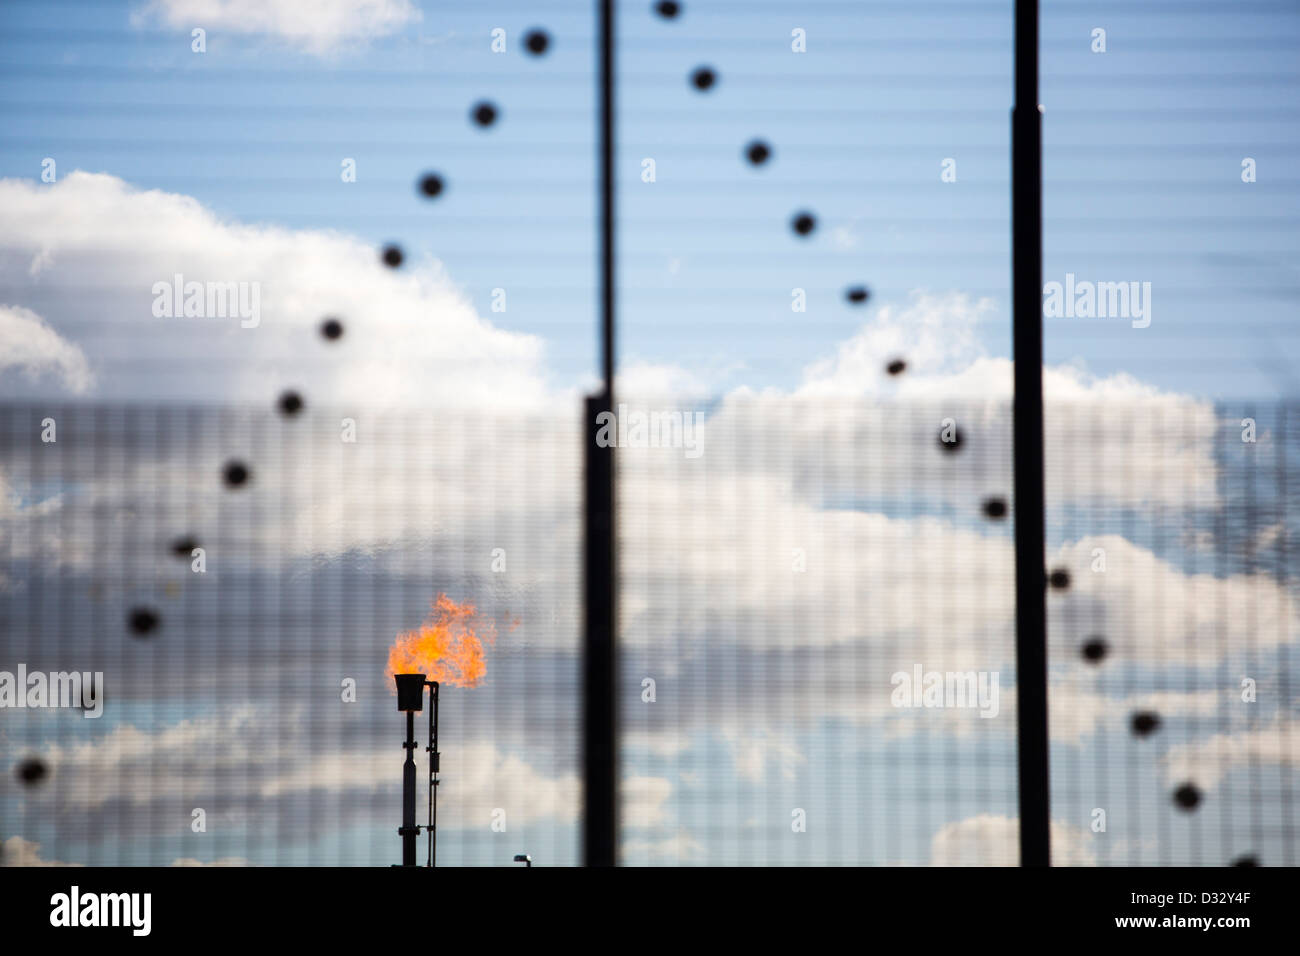 A gas flare at the Rampside gas terminal in Barrow in Furness, Cumbria, UK, which processes natural gas Stock Photo